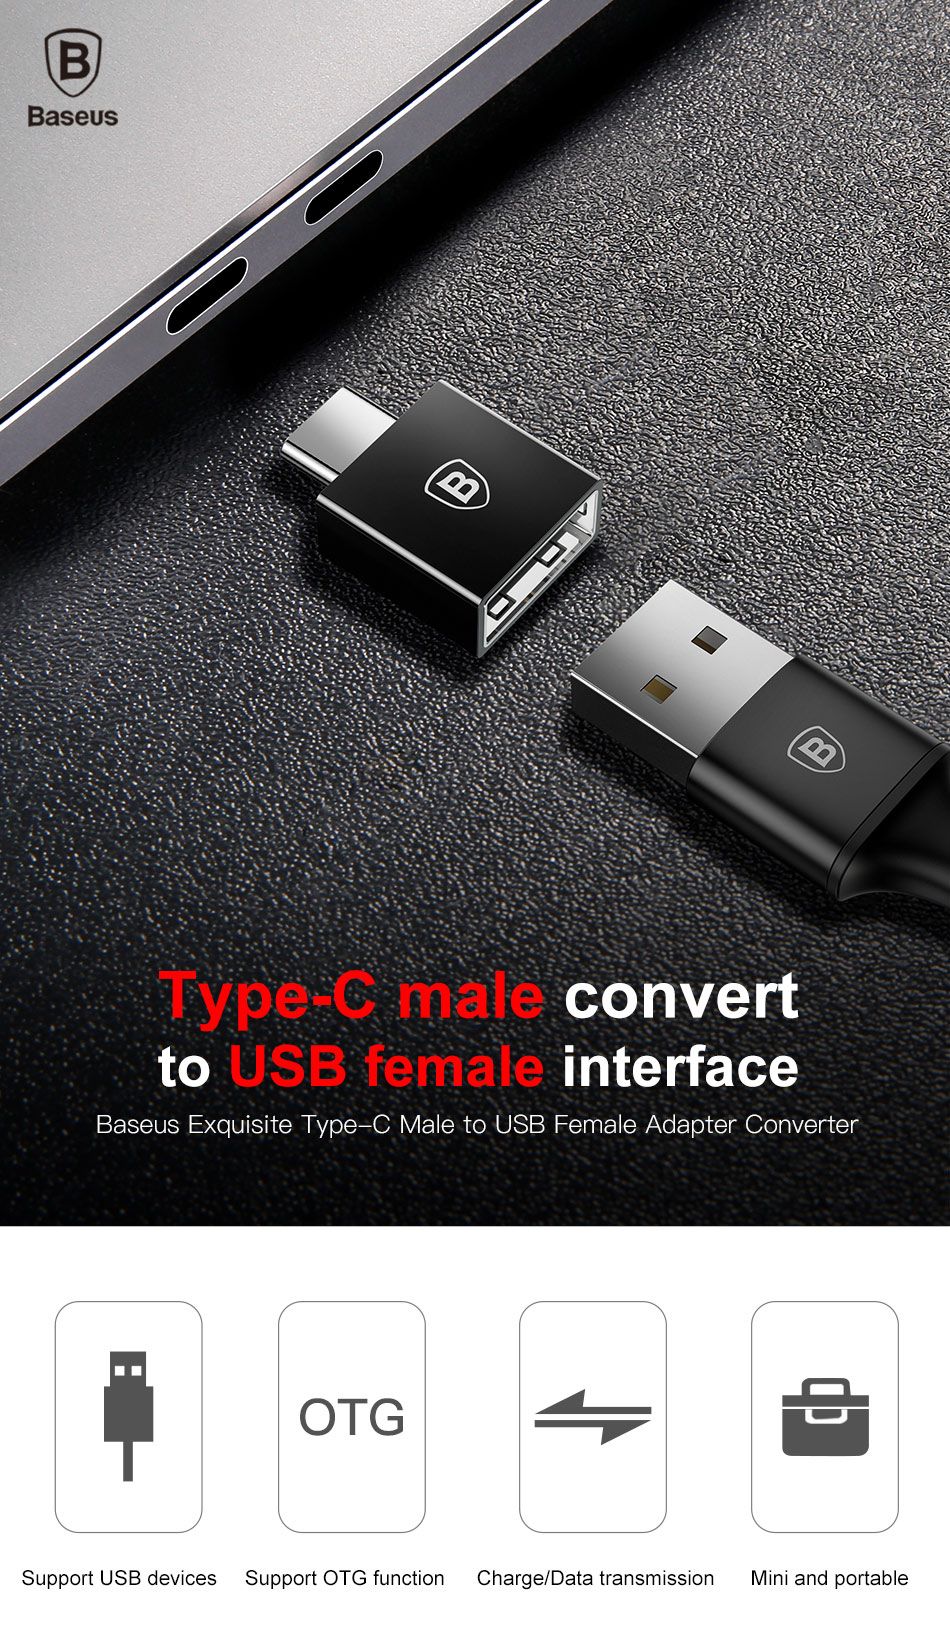 Baseus-Type-C-Male-to-USB-Female-Cable-U-Disk-OTG-Adapter-Plug-Converter-for-Tablets-PC-Smartphone-1259712